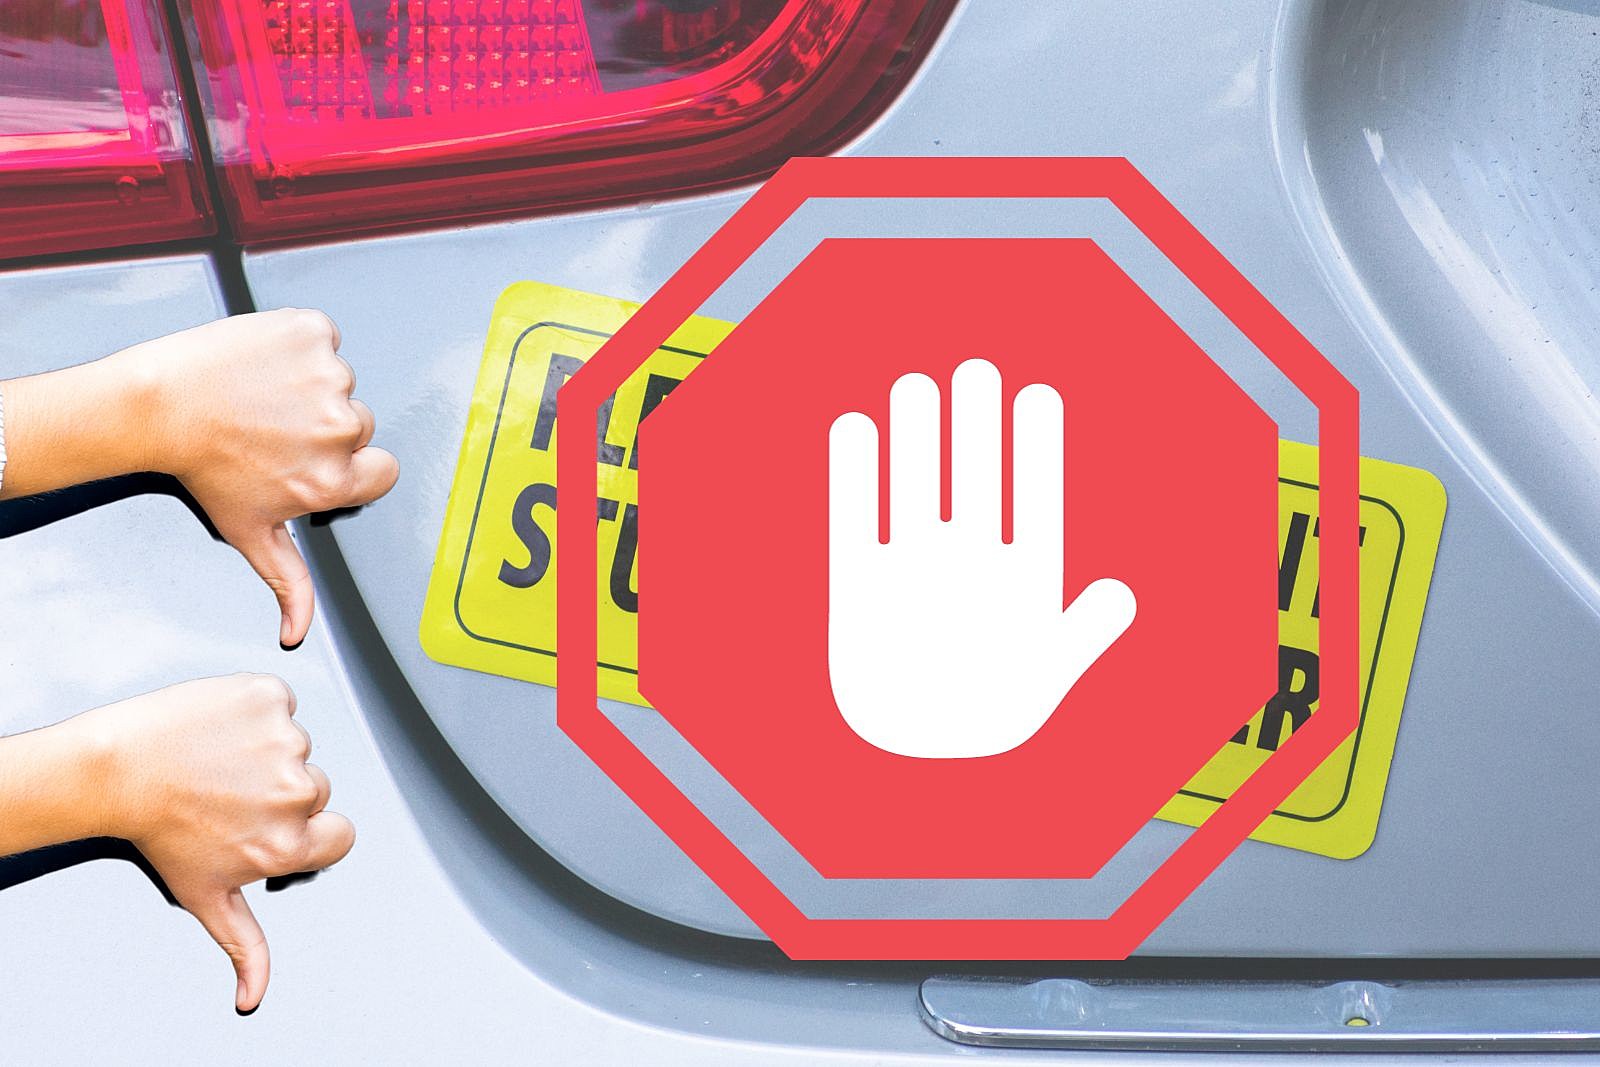 Hey, NJ Drivers: Remove These Harmful Bumper Stickers IMMEDIATELY